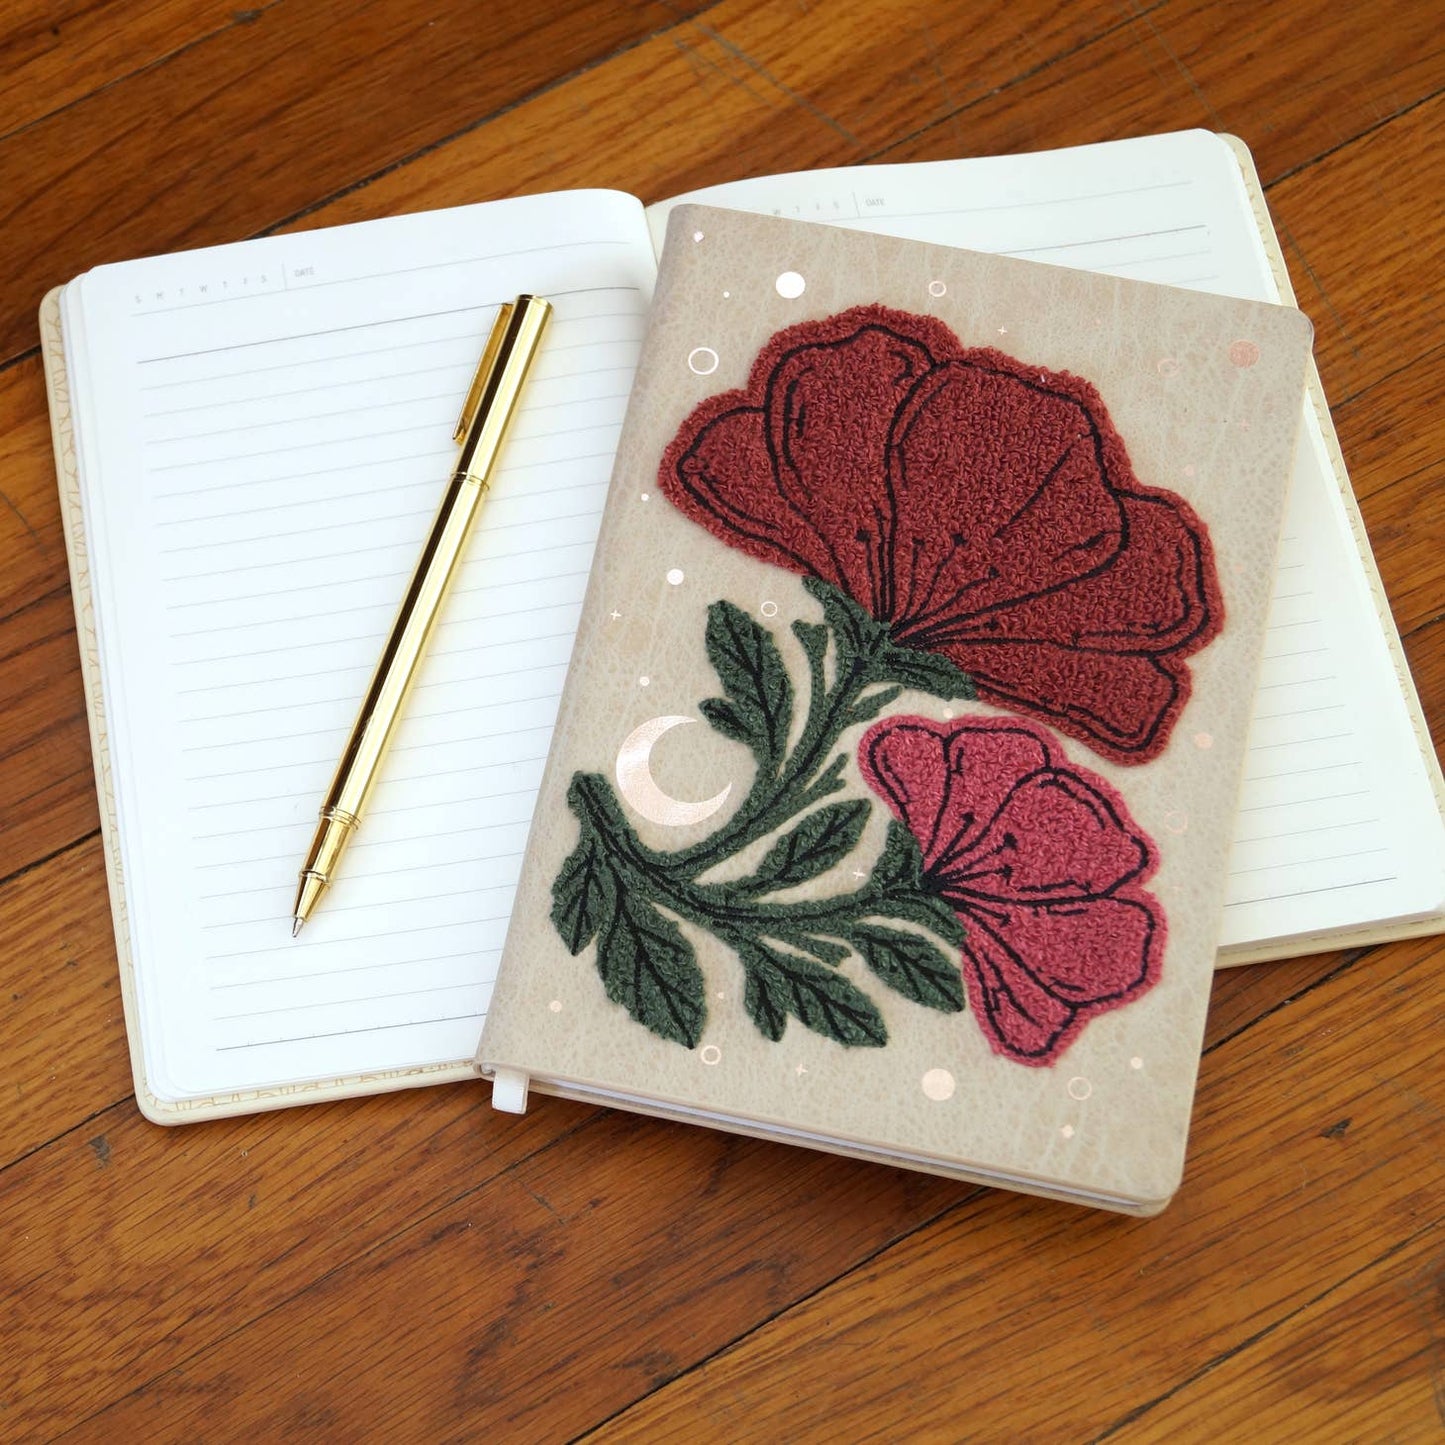 Double Bloom Embroidered Journal Notebook